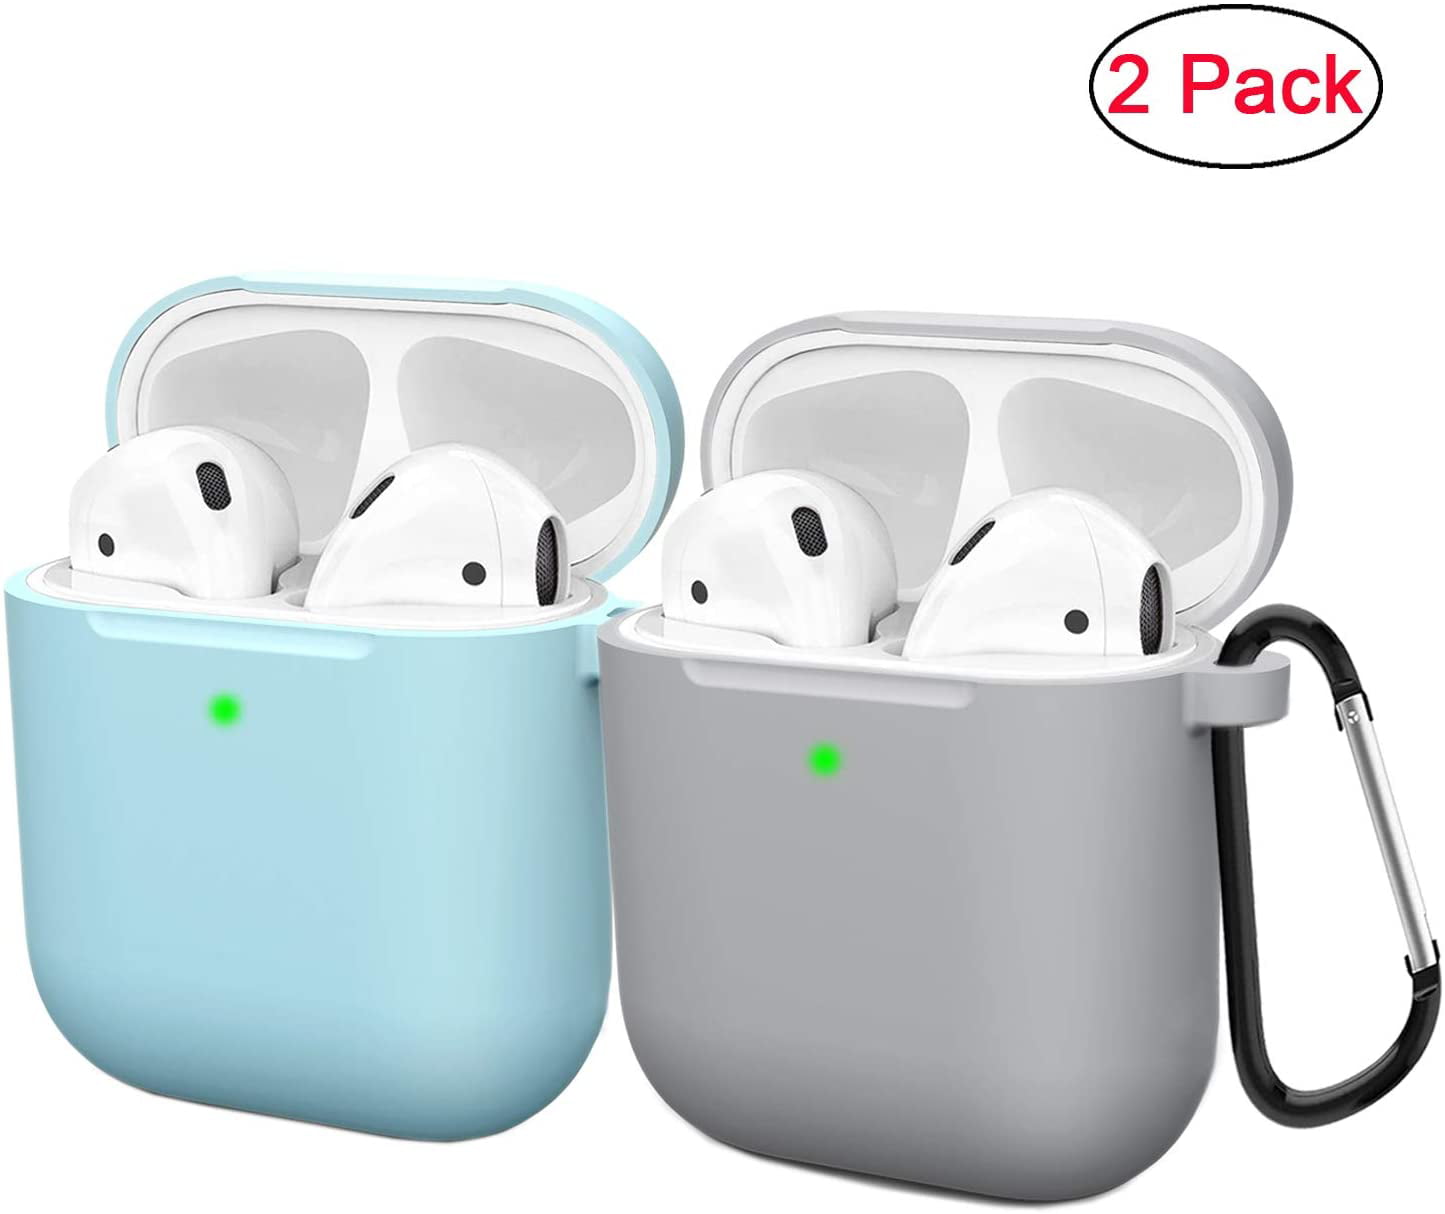 Black/Gray 2 Pack Compatible AirPods Case Cover Silicone Protective Skin for Apple Airpod Case 2&1